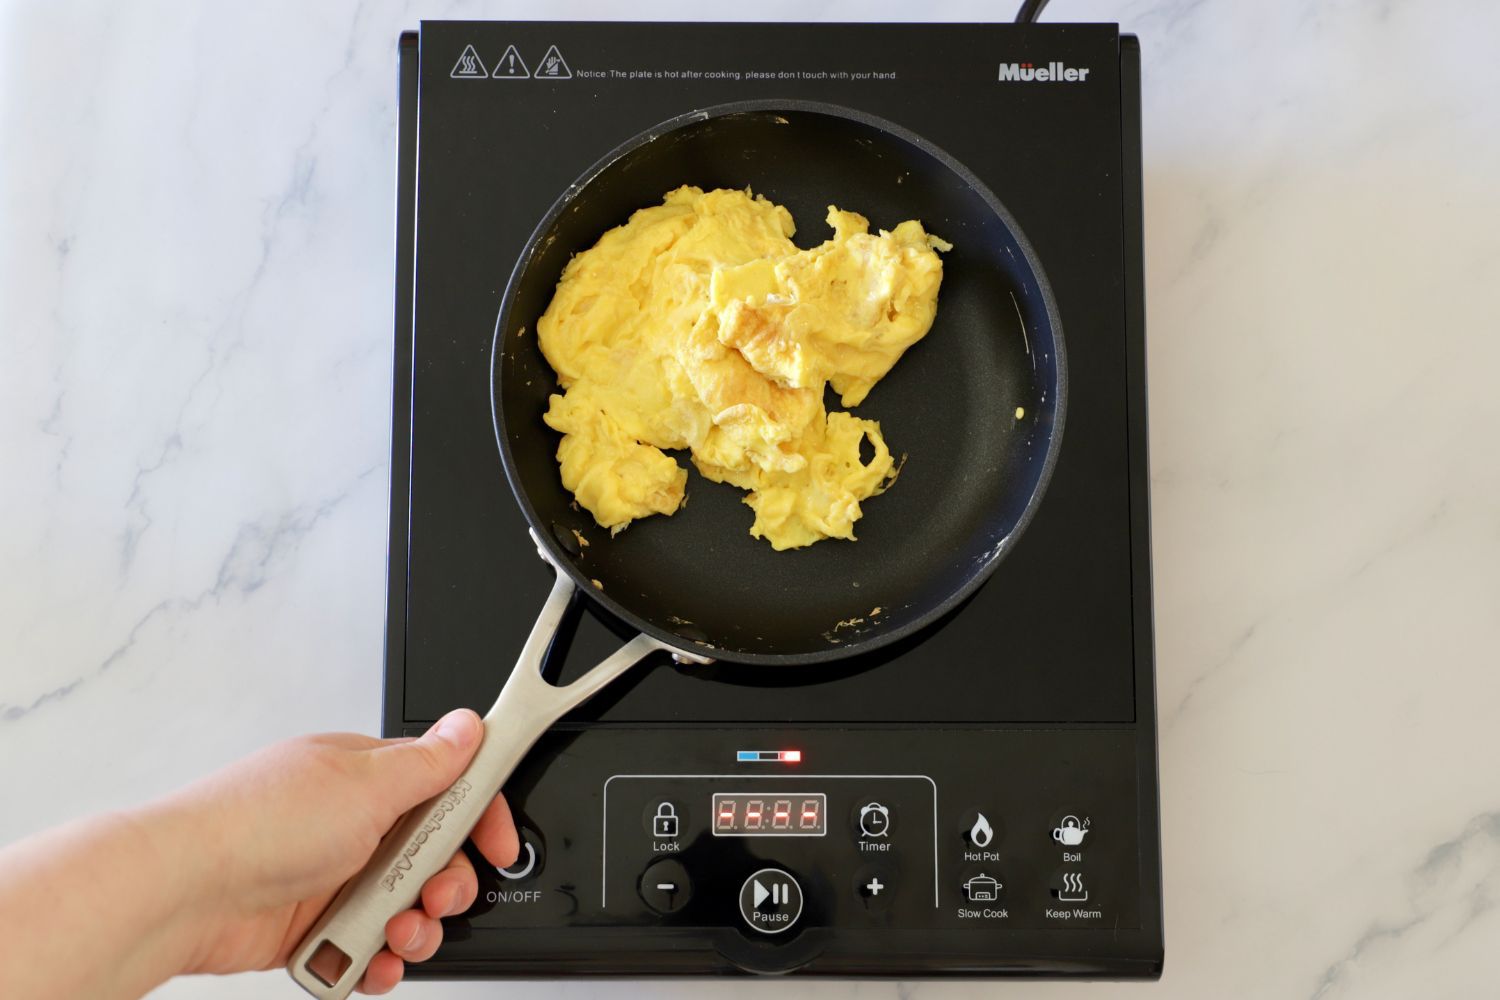 scrambling eggs in a nonstick pan on an induction burner